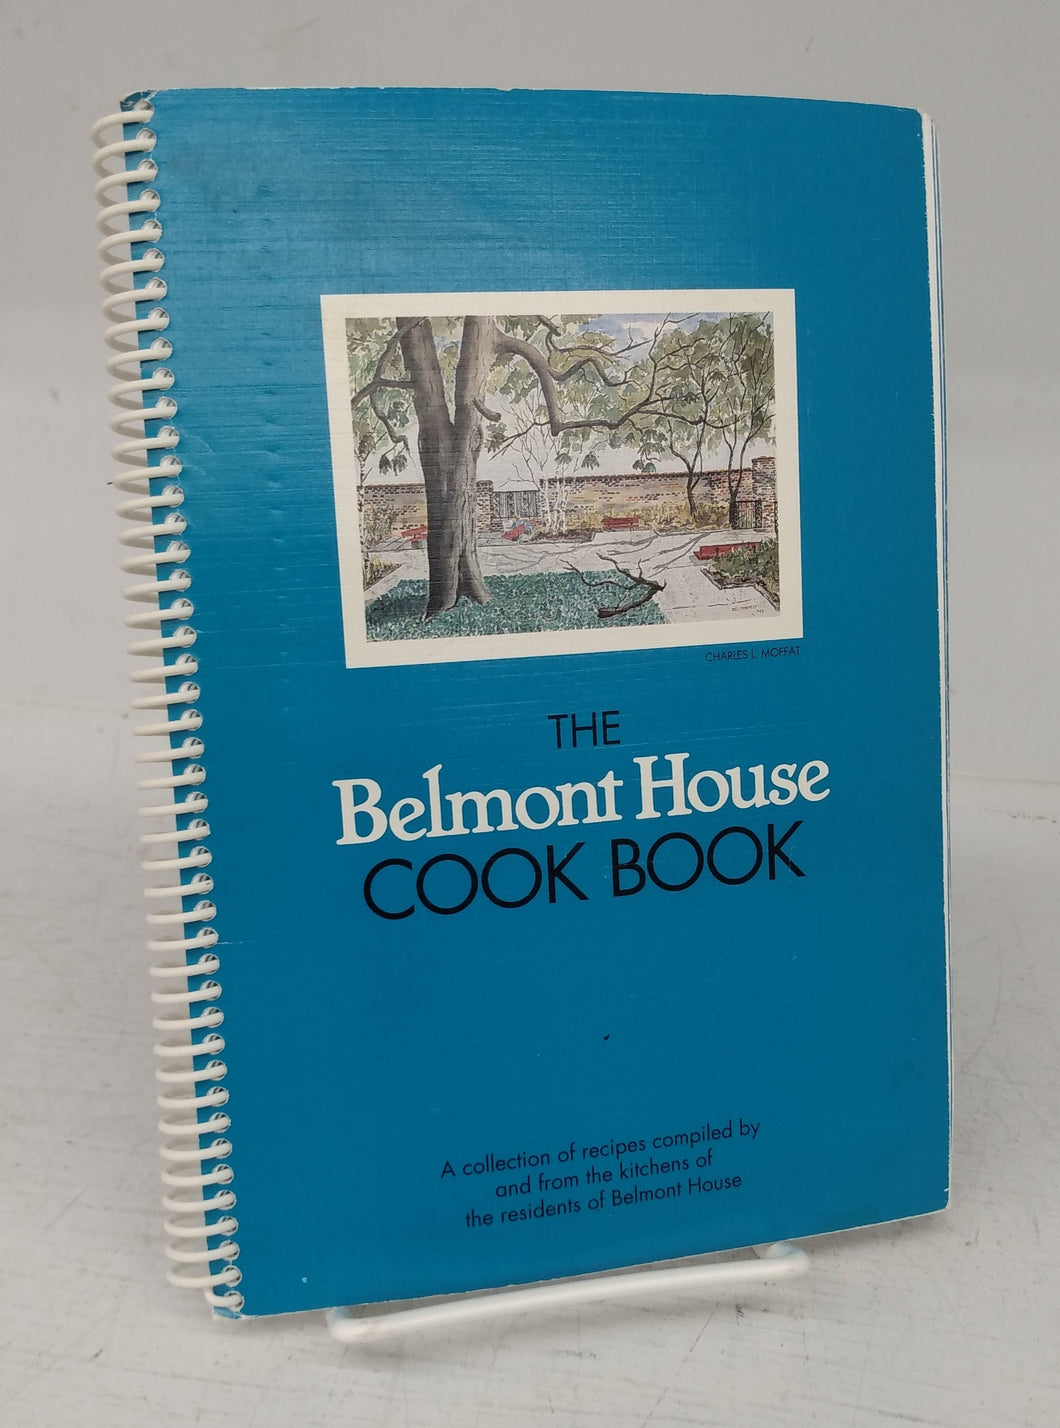 The Belmont House Cook Book